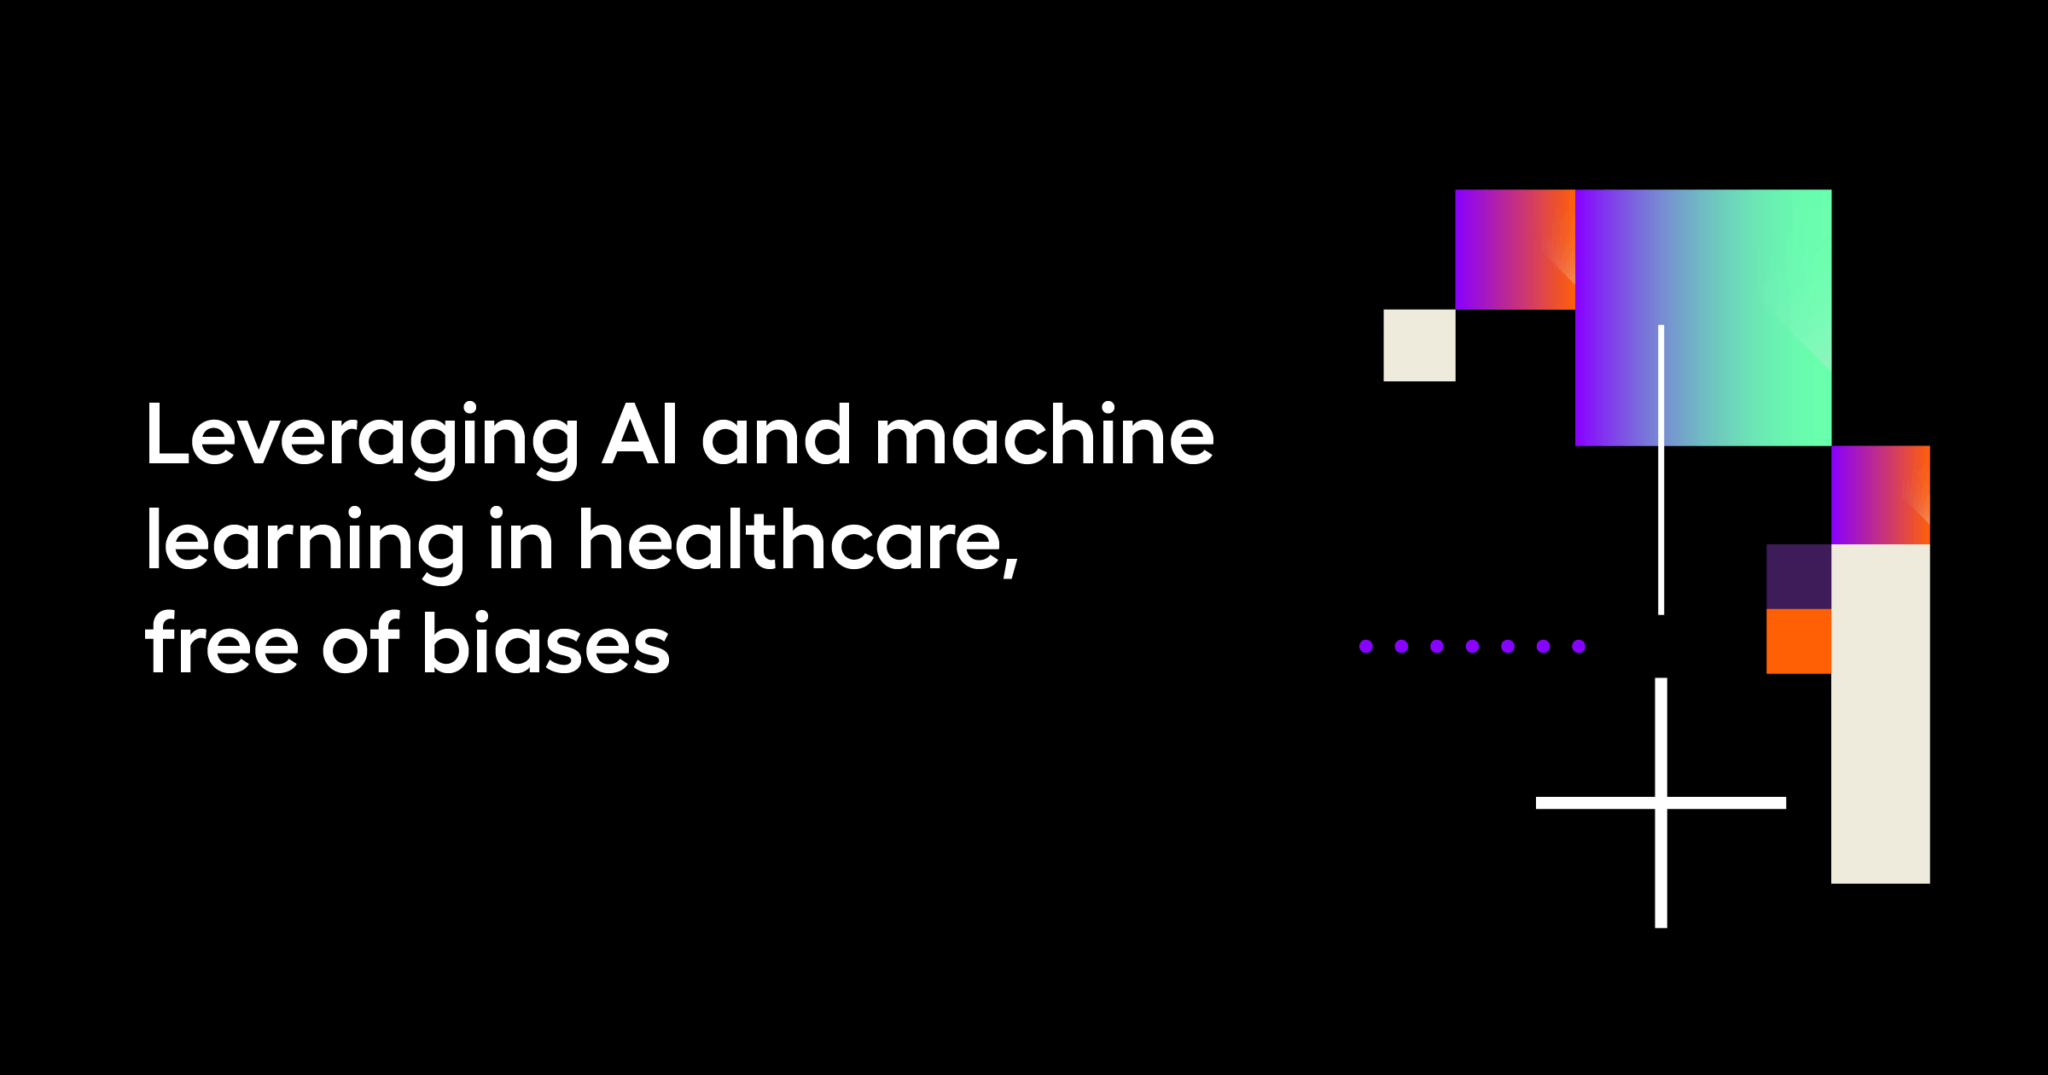 Leveraging AI and machine learning in healthcare, free of biases